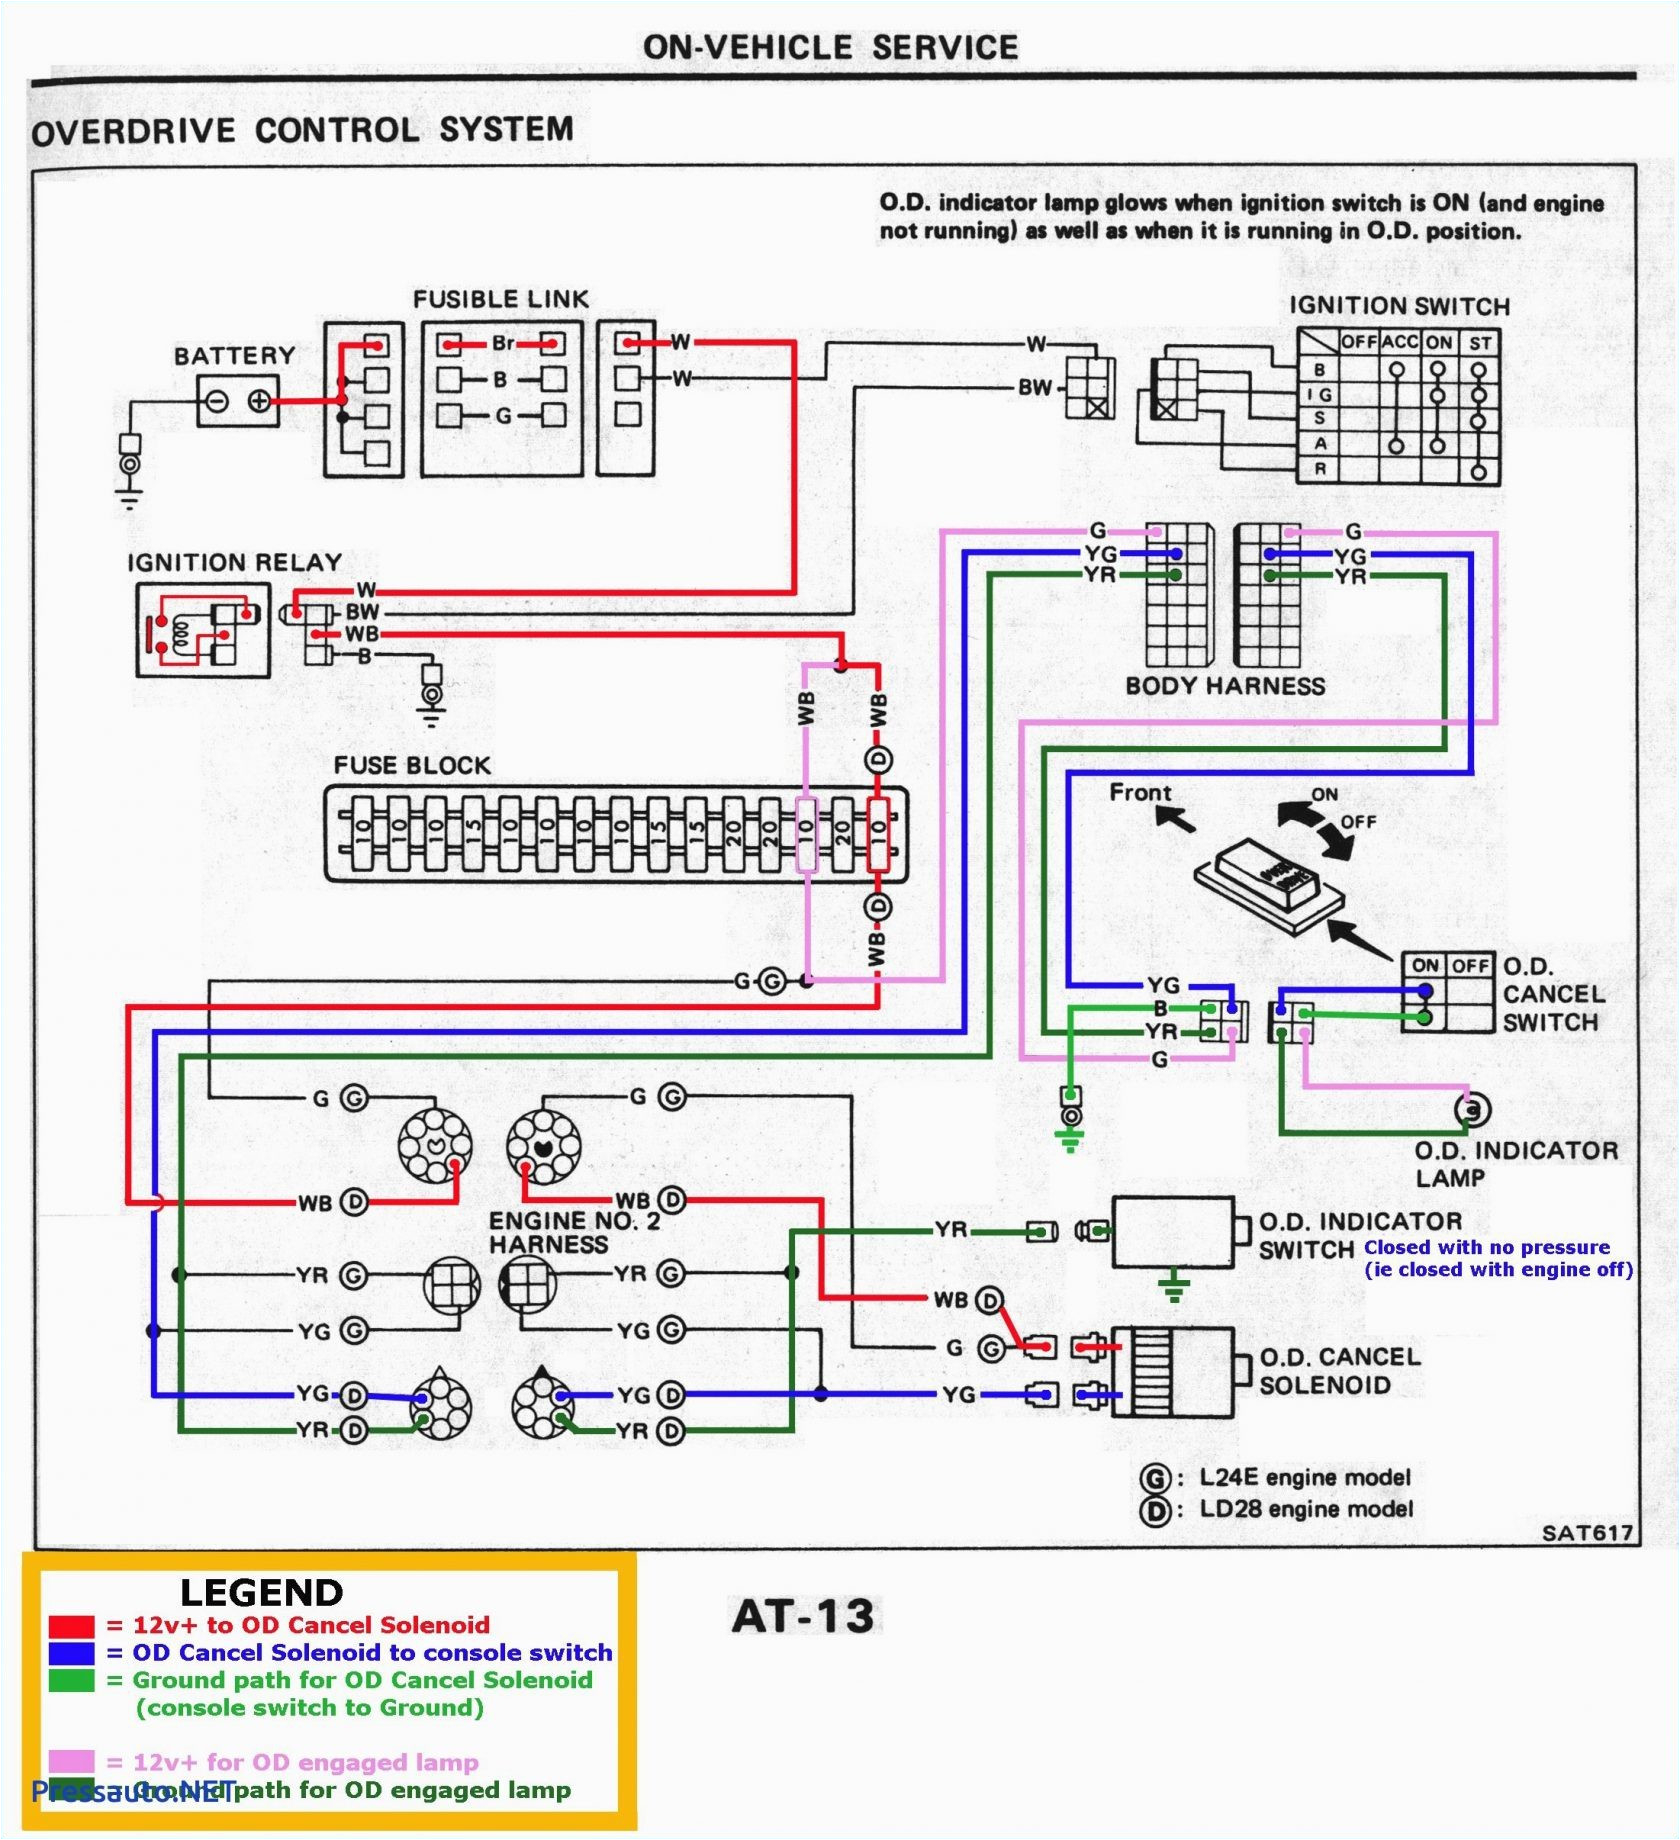 95 toyota camry fuel pump relay location get free image about wiring fuel system wiring diagram 2005 toyota